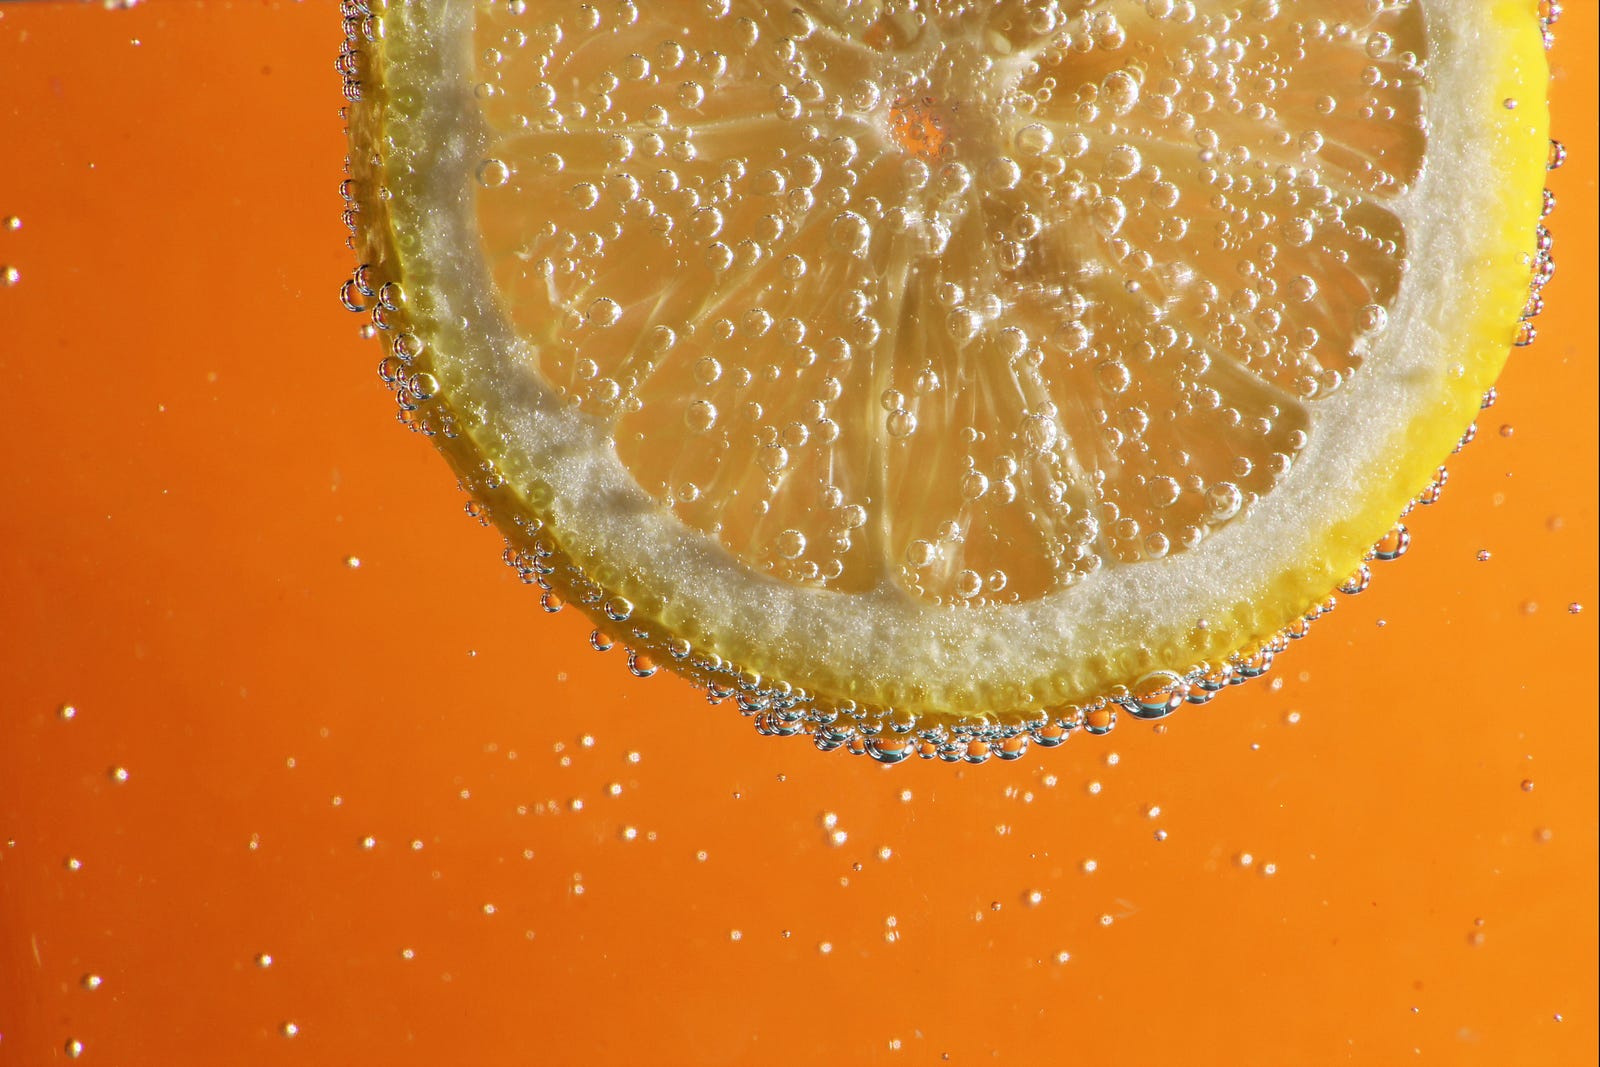 A slice of lemon floats in carbonated water. There is an orange background. The beverage’s gas can be natural, or manufacturers may infuse it into still water. In some forms, sparkling water is a healthy alternative to soda. Mineral water may have natural bubbles, minerals, and sulfur compounds from a mineral spring. Tonic water contains quinine and sugar or high-fructose corn syrup. Other seltzers or sparkling waters add sugars or artificial sweeteners.